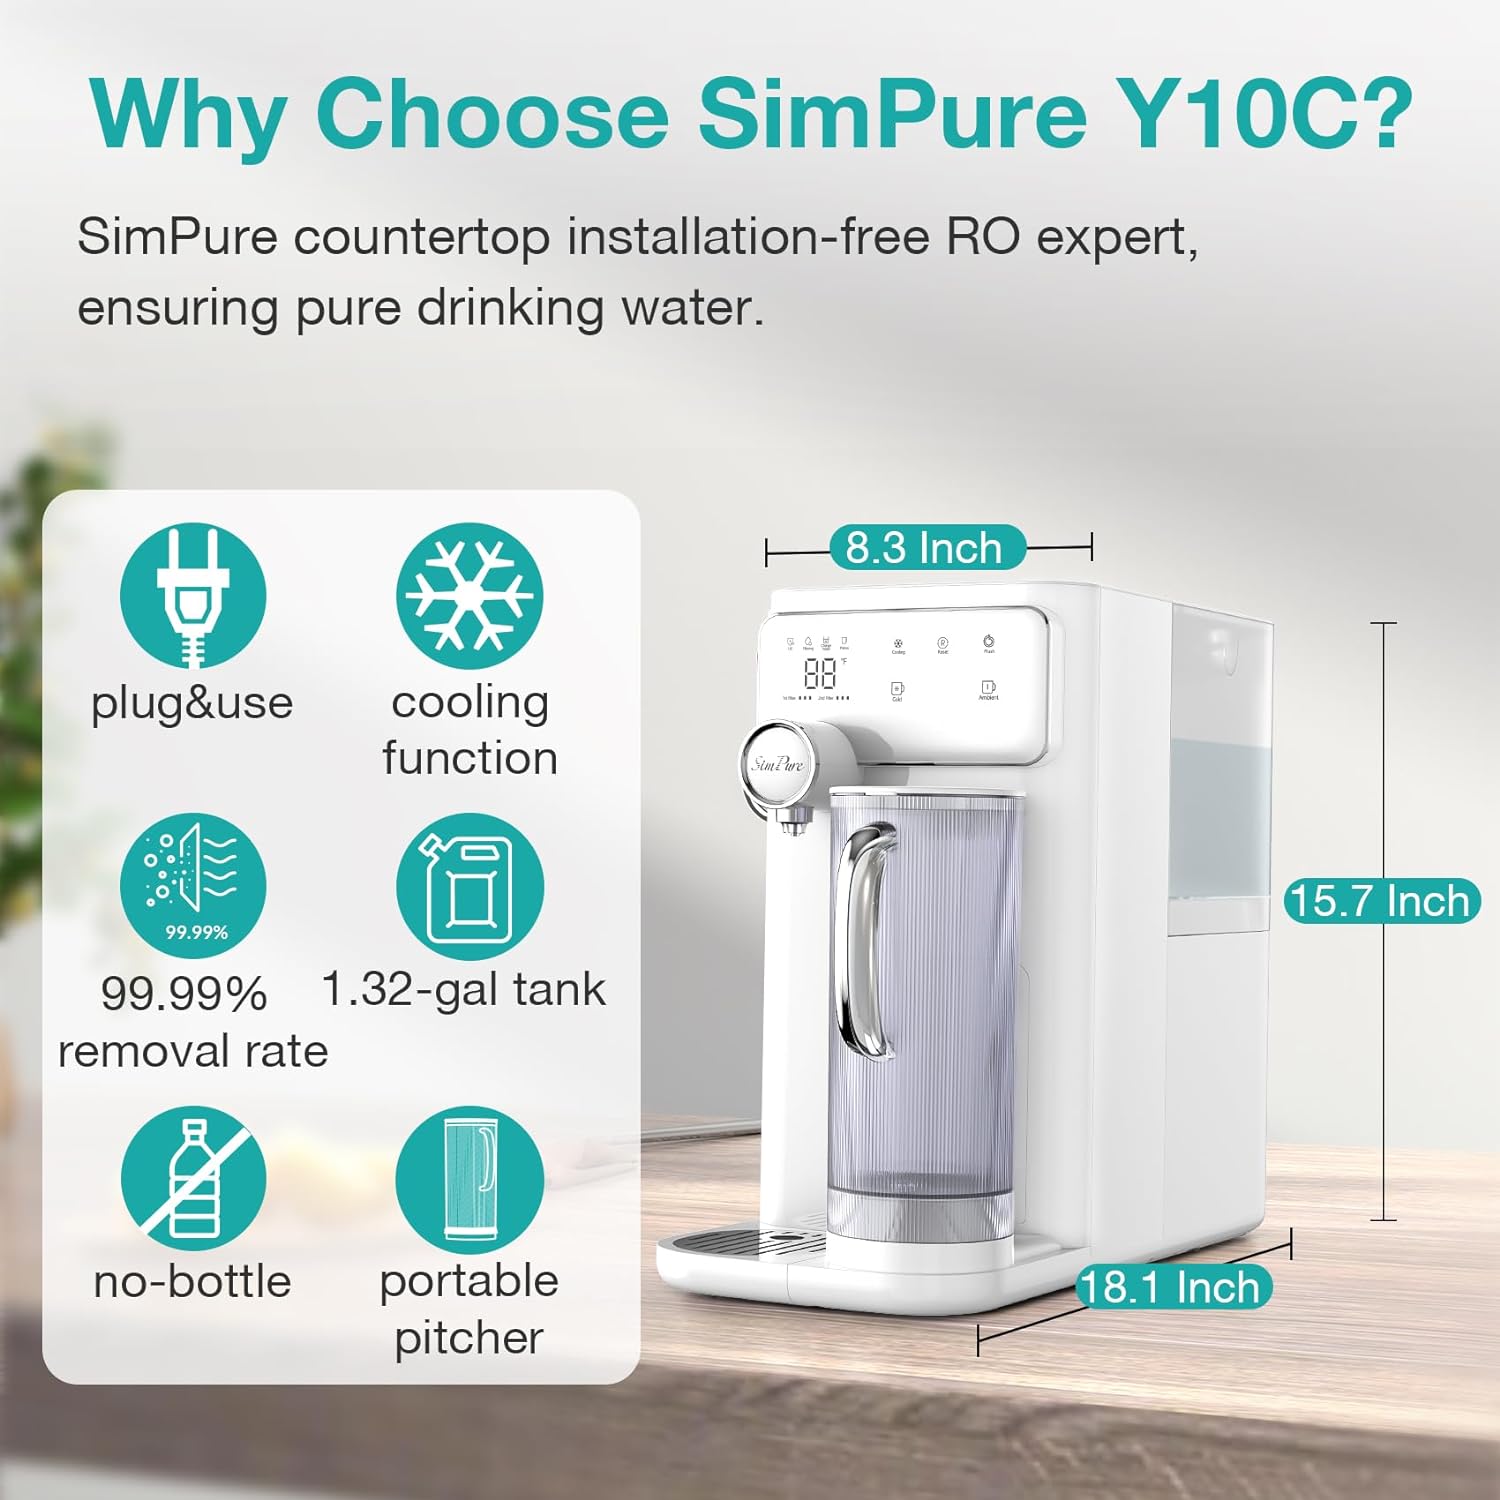 SimPure Y10C Cold Countertop RO System Cooler Water Filter Dispenser | 5-in-1 RO+CTO+UV 7-Stage Filtration